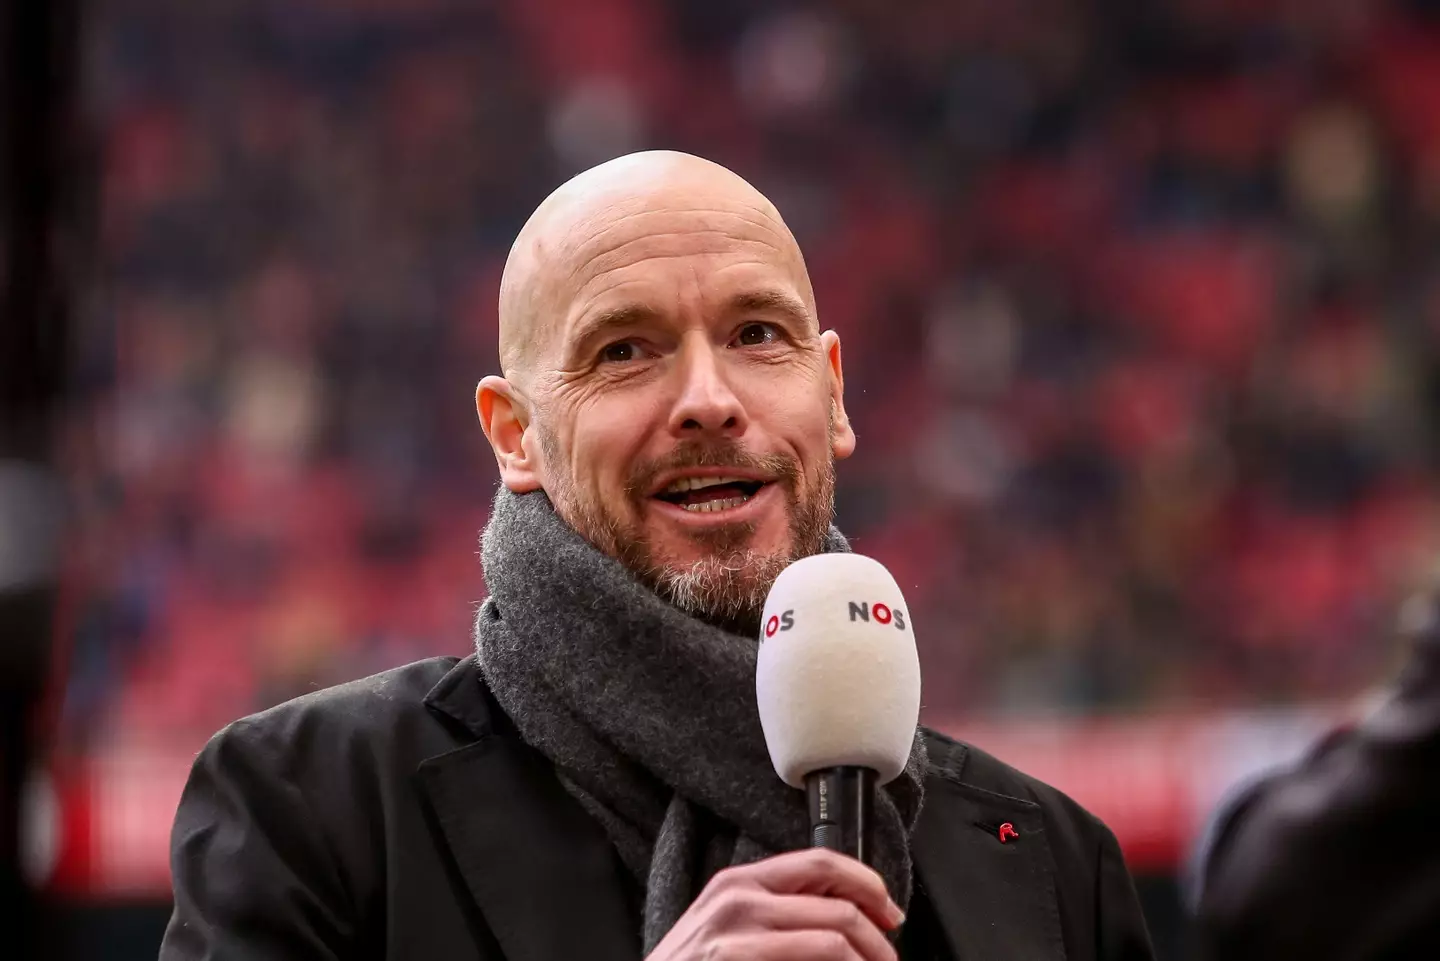 Ten Hag is likely to be the new United manager. Image: PA Images